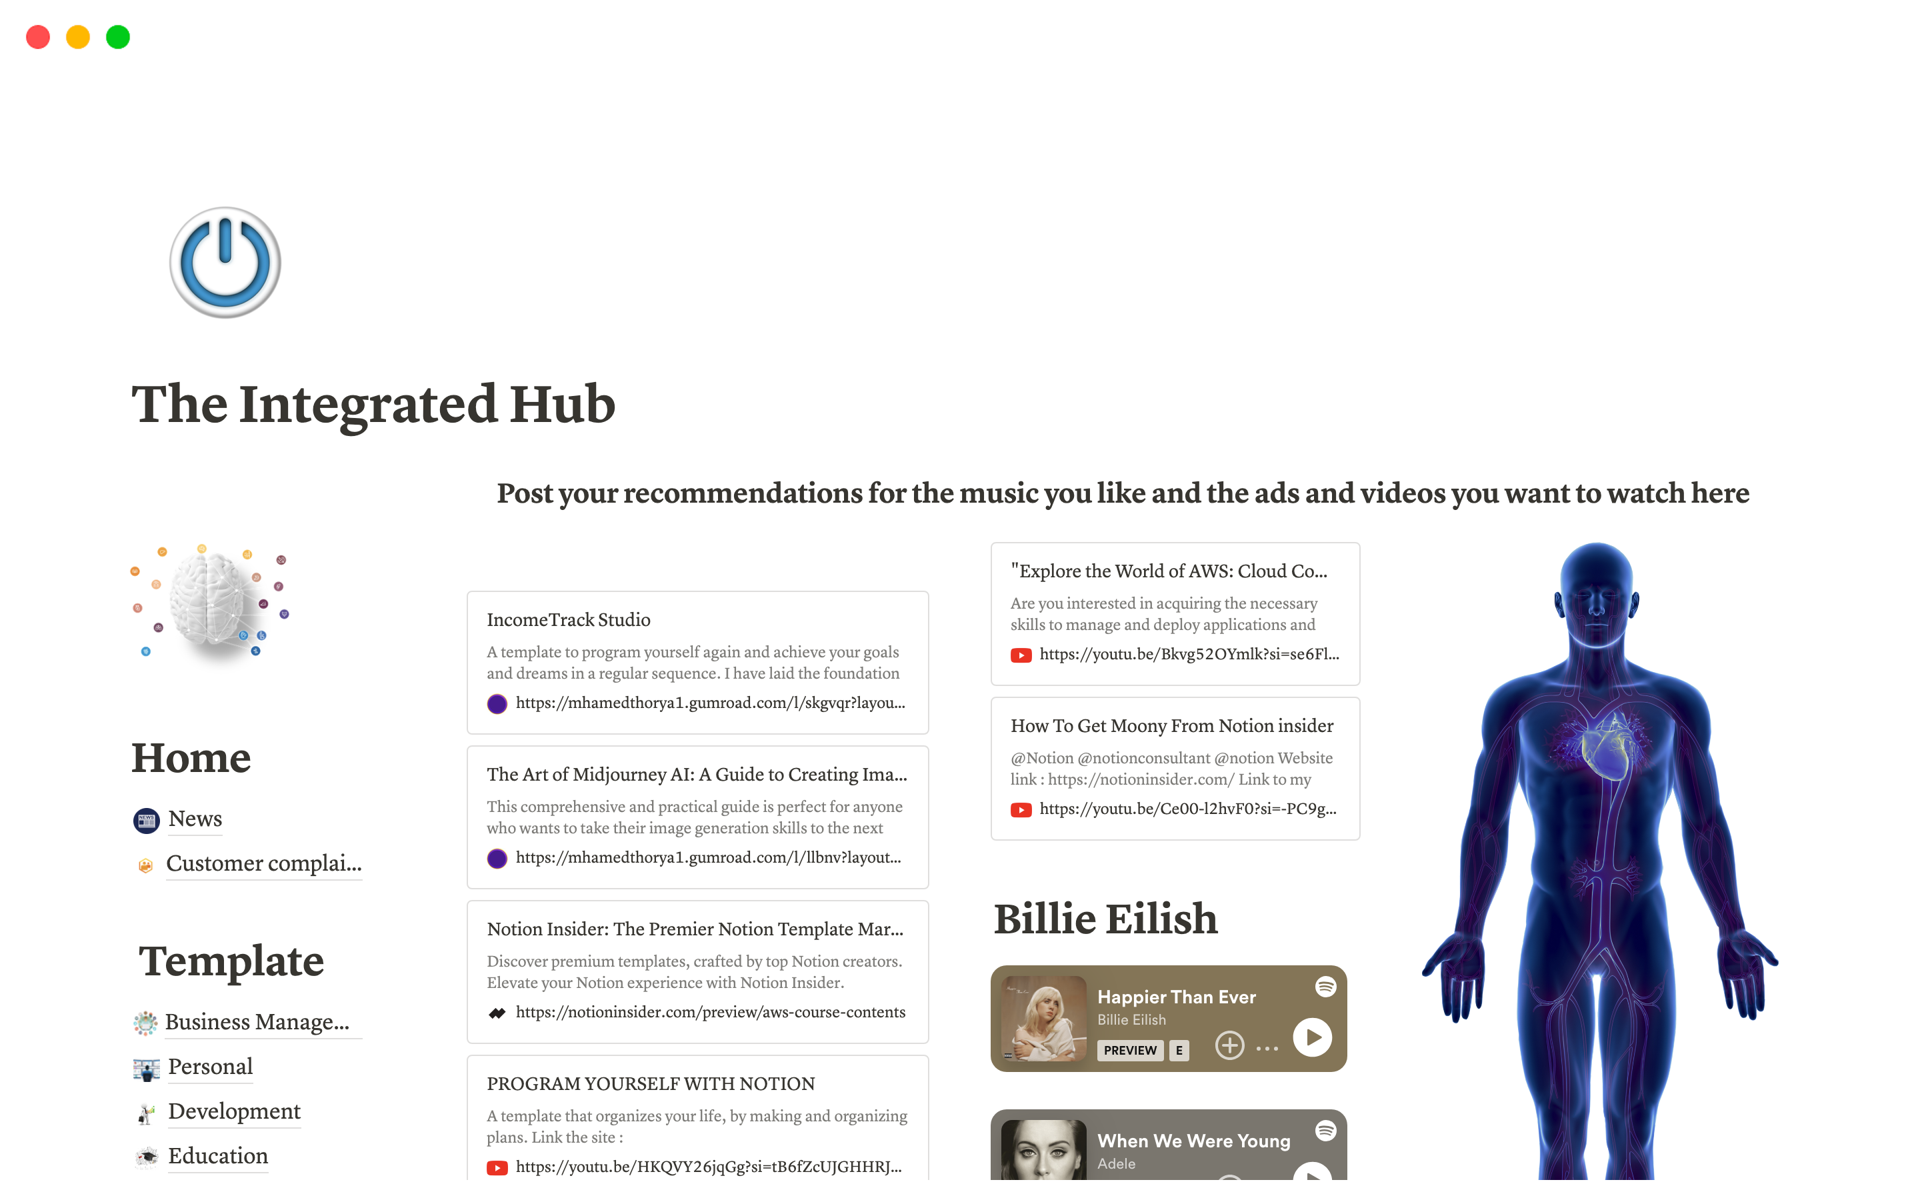 "Welcome to the Integrated Hub!

Our Notion template brings together a diverse range of activities, free templates, lessons, videos, hobbies, favorite music, and design elements, all in one easy-to-navigate place.